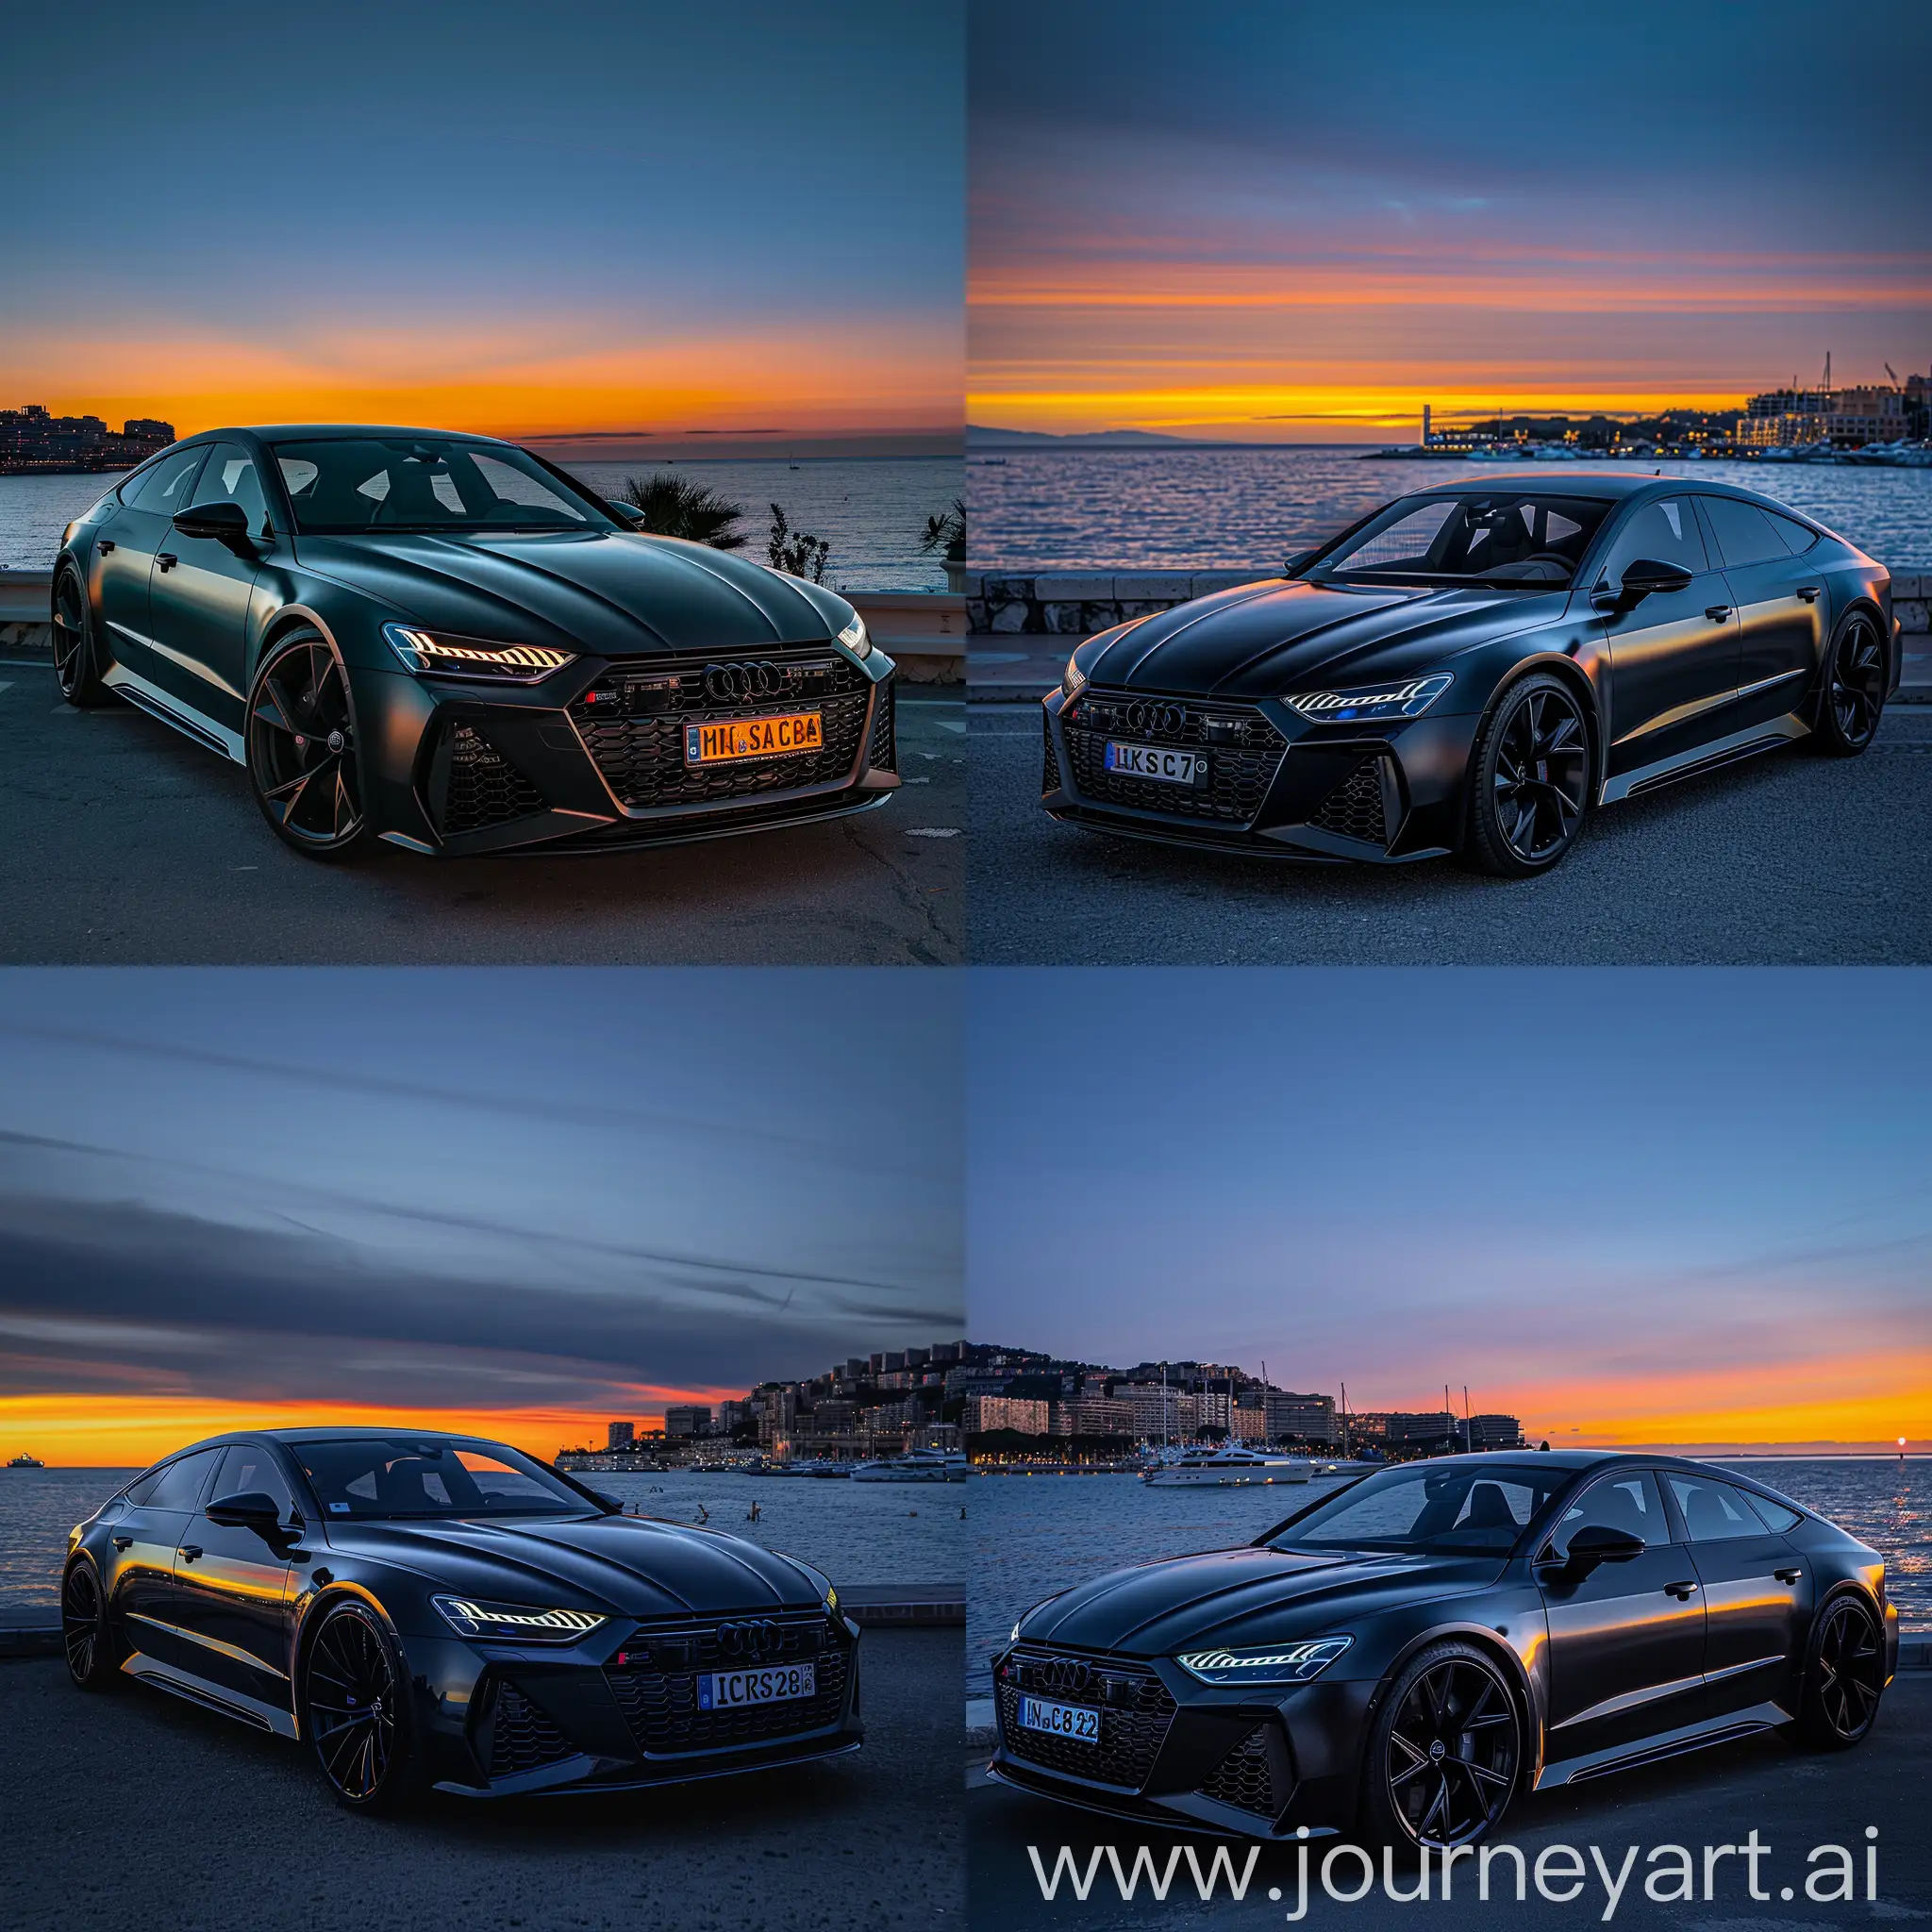 Realistic audi rs7 c8 2022 in full mat black with black rims in Monaco near the water with blue dark orange sky with Belgium car plate realistic Snapchat style photo 